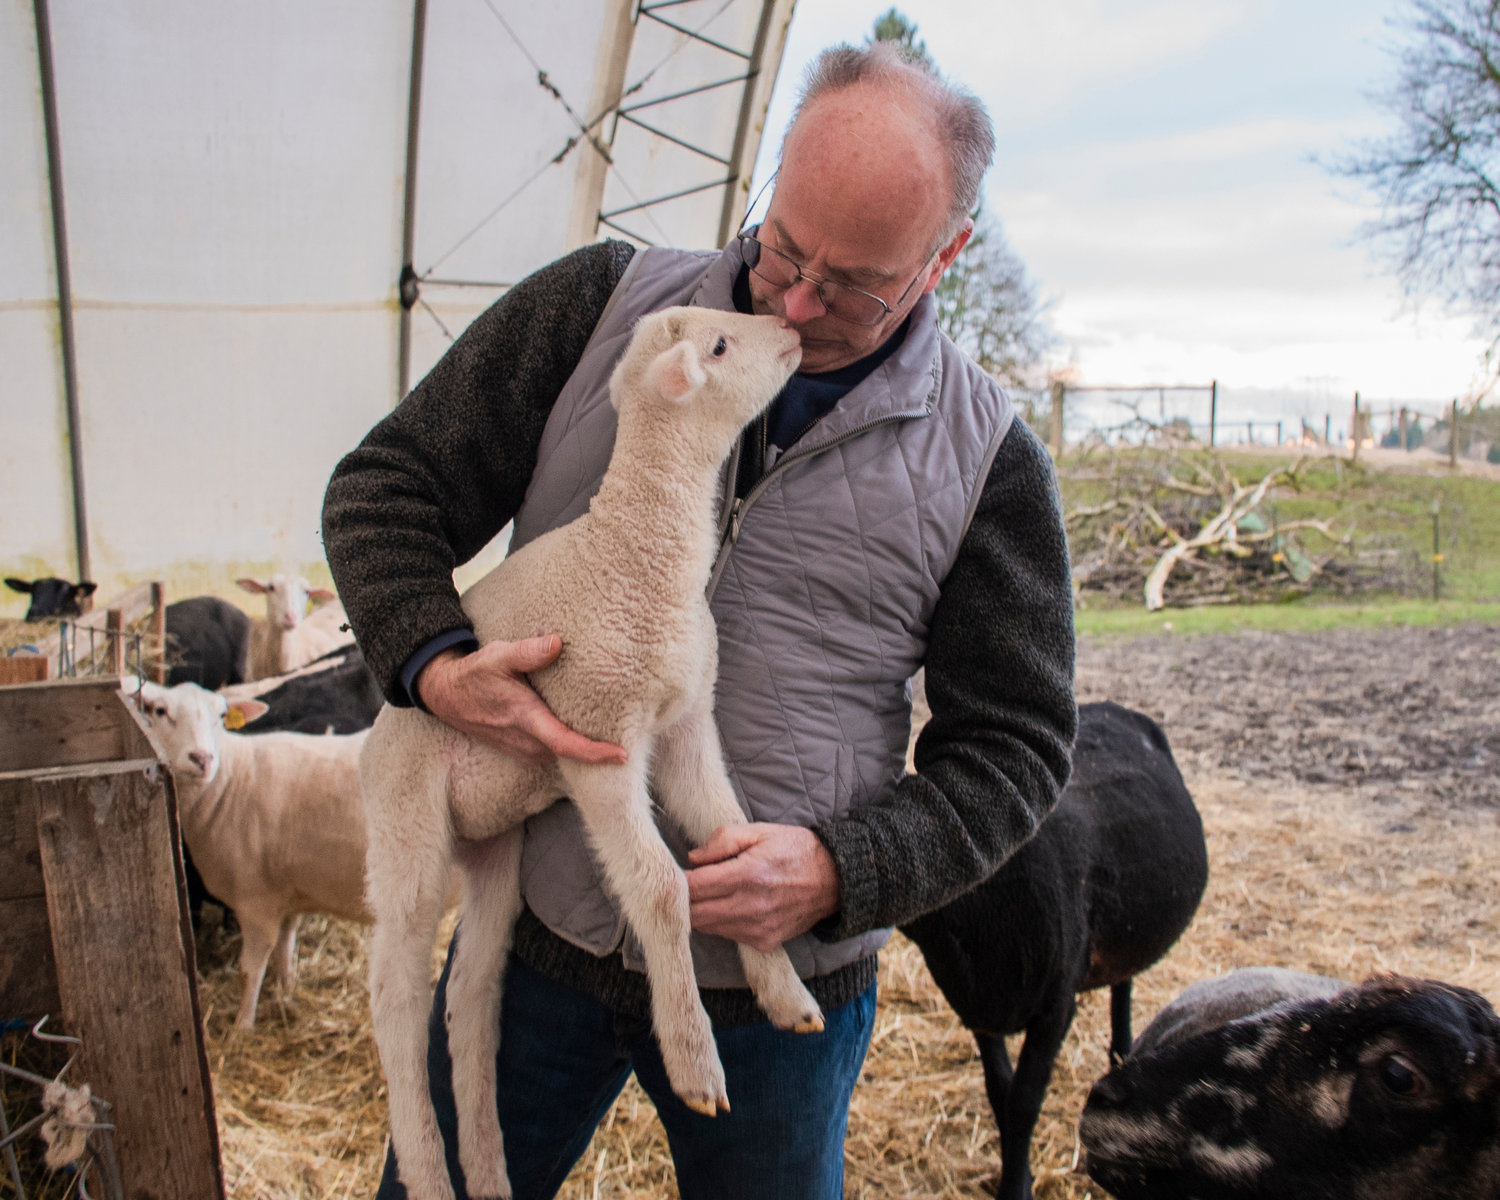 Brad Gregory shows affection to a young lamb while holding it in front of a critter pad among his flock of East Friesian sheep at Black Sheep Creamery in Adna.